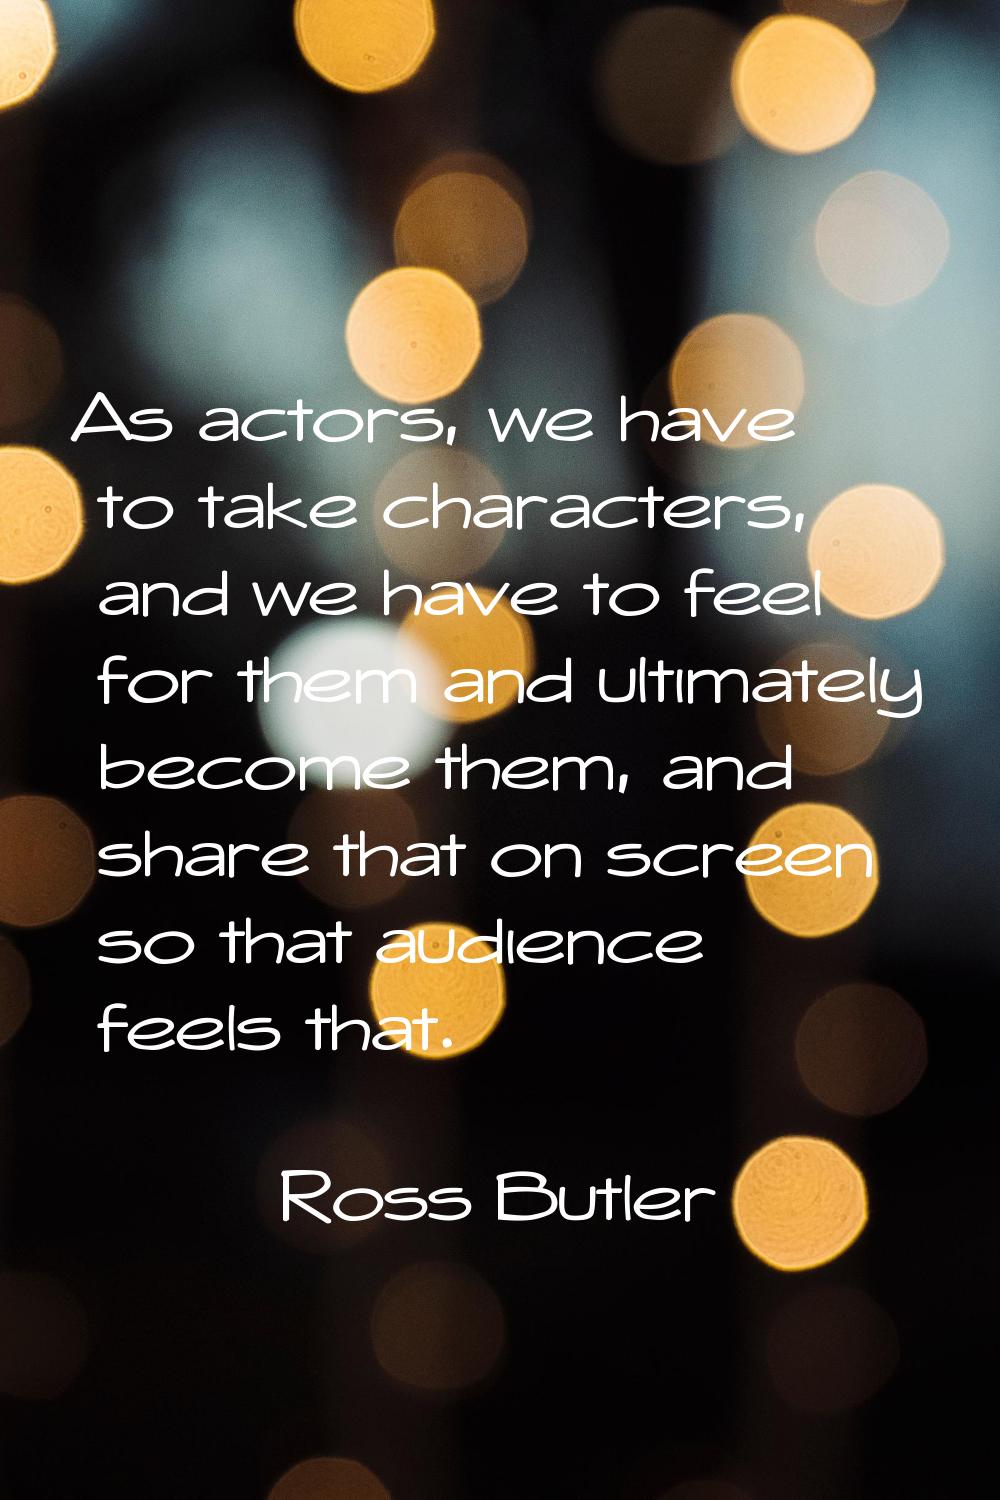 As actors, we have to take characters, and we have to feel for them and ultimately become them, and